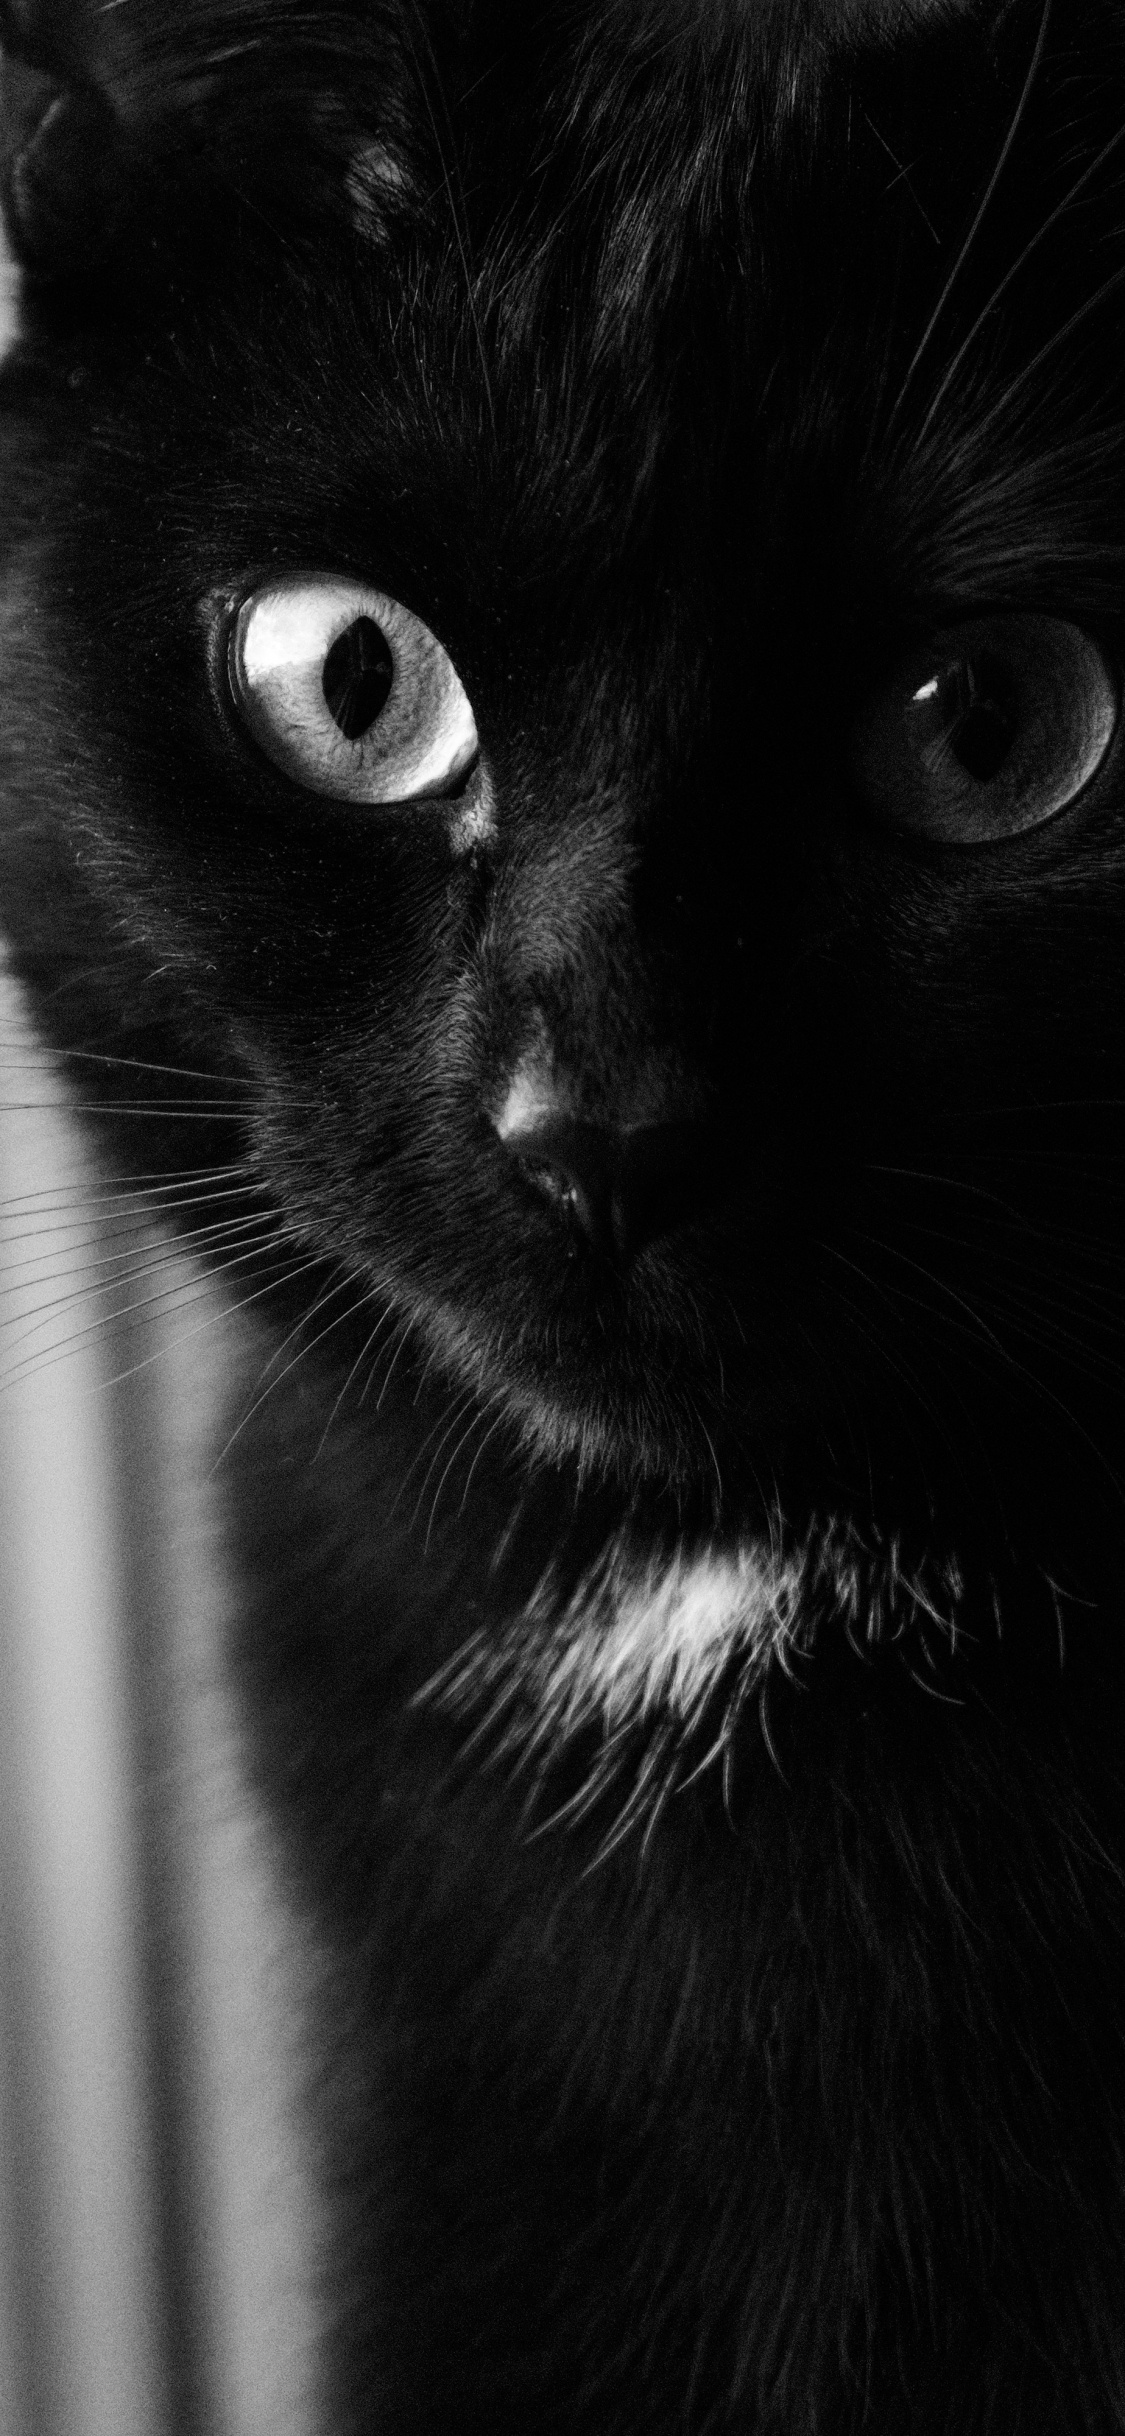 Black Cat in Grayscale Photography. Wallpaper in 1125x2436 Resolution